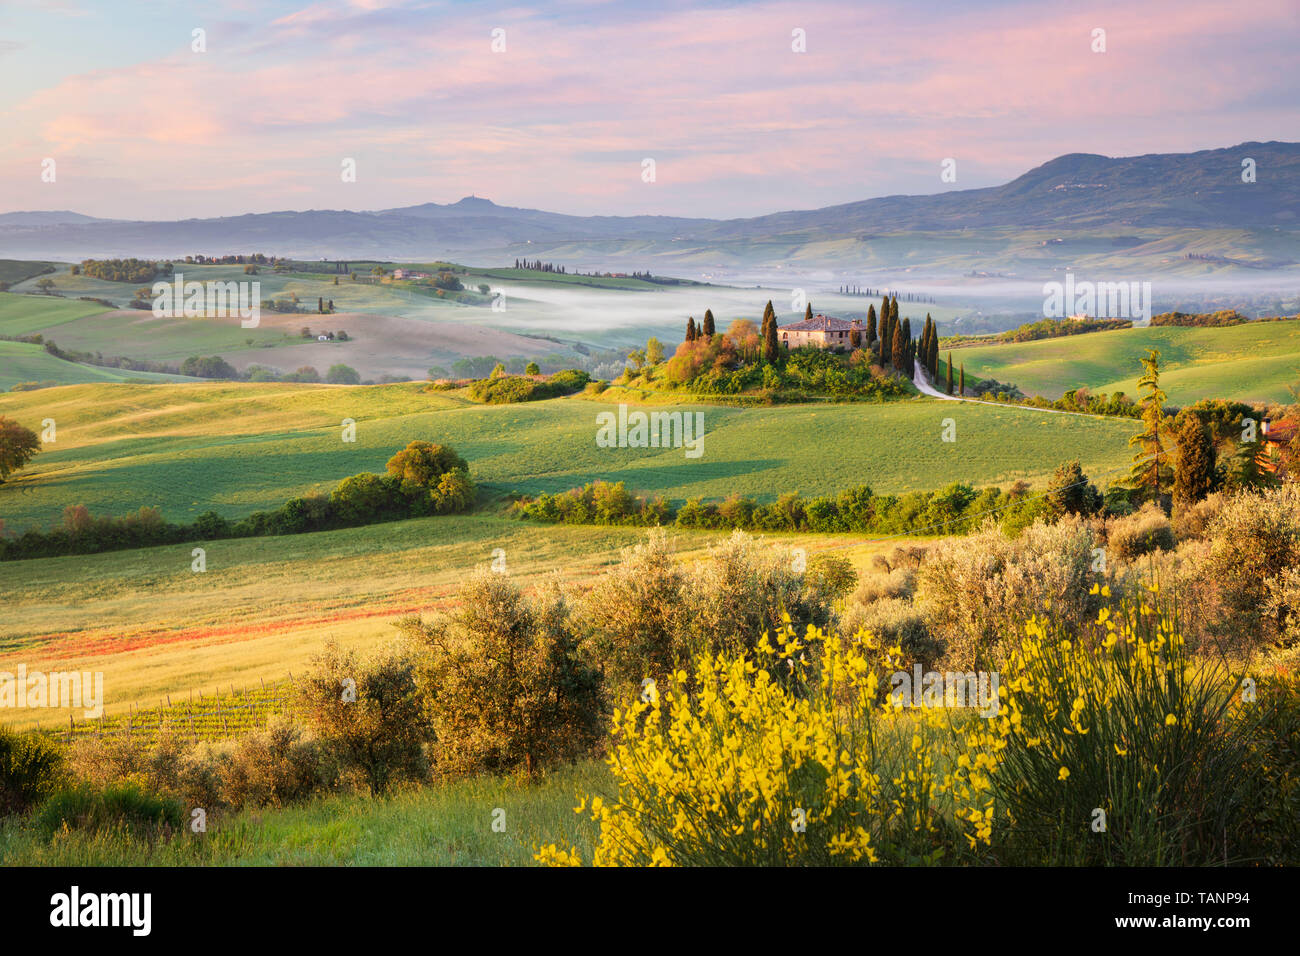 View over misty morning Tuscan landscape with traditional farmhouse and cypress trees, San Quirico d'Orcia, Siena Province, Tuscany, Italy, Europe Stock Photo